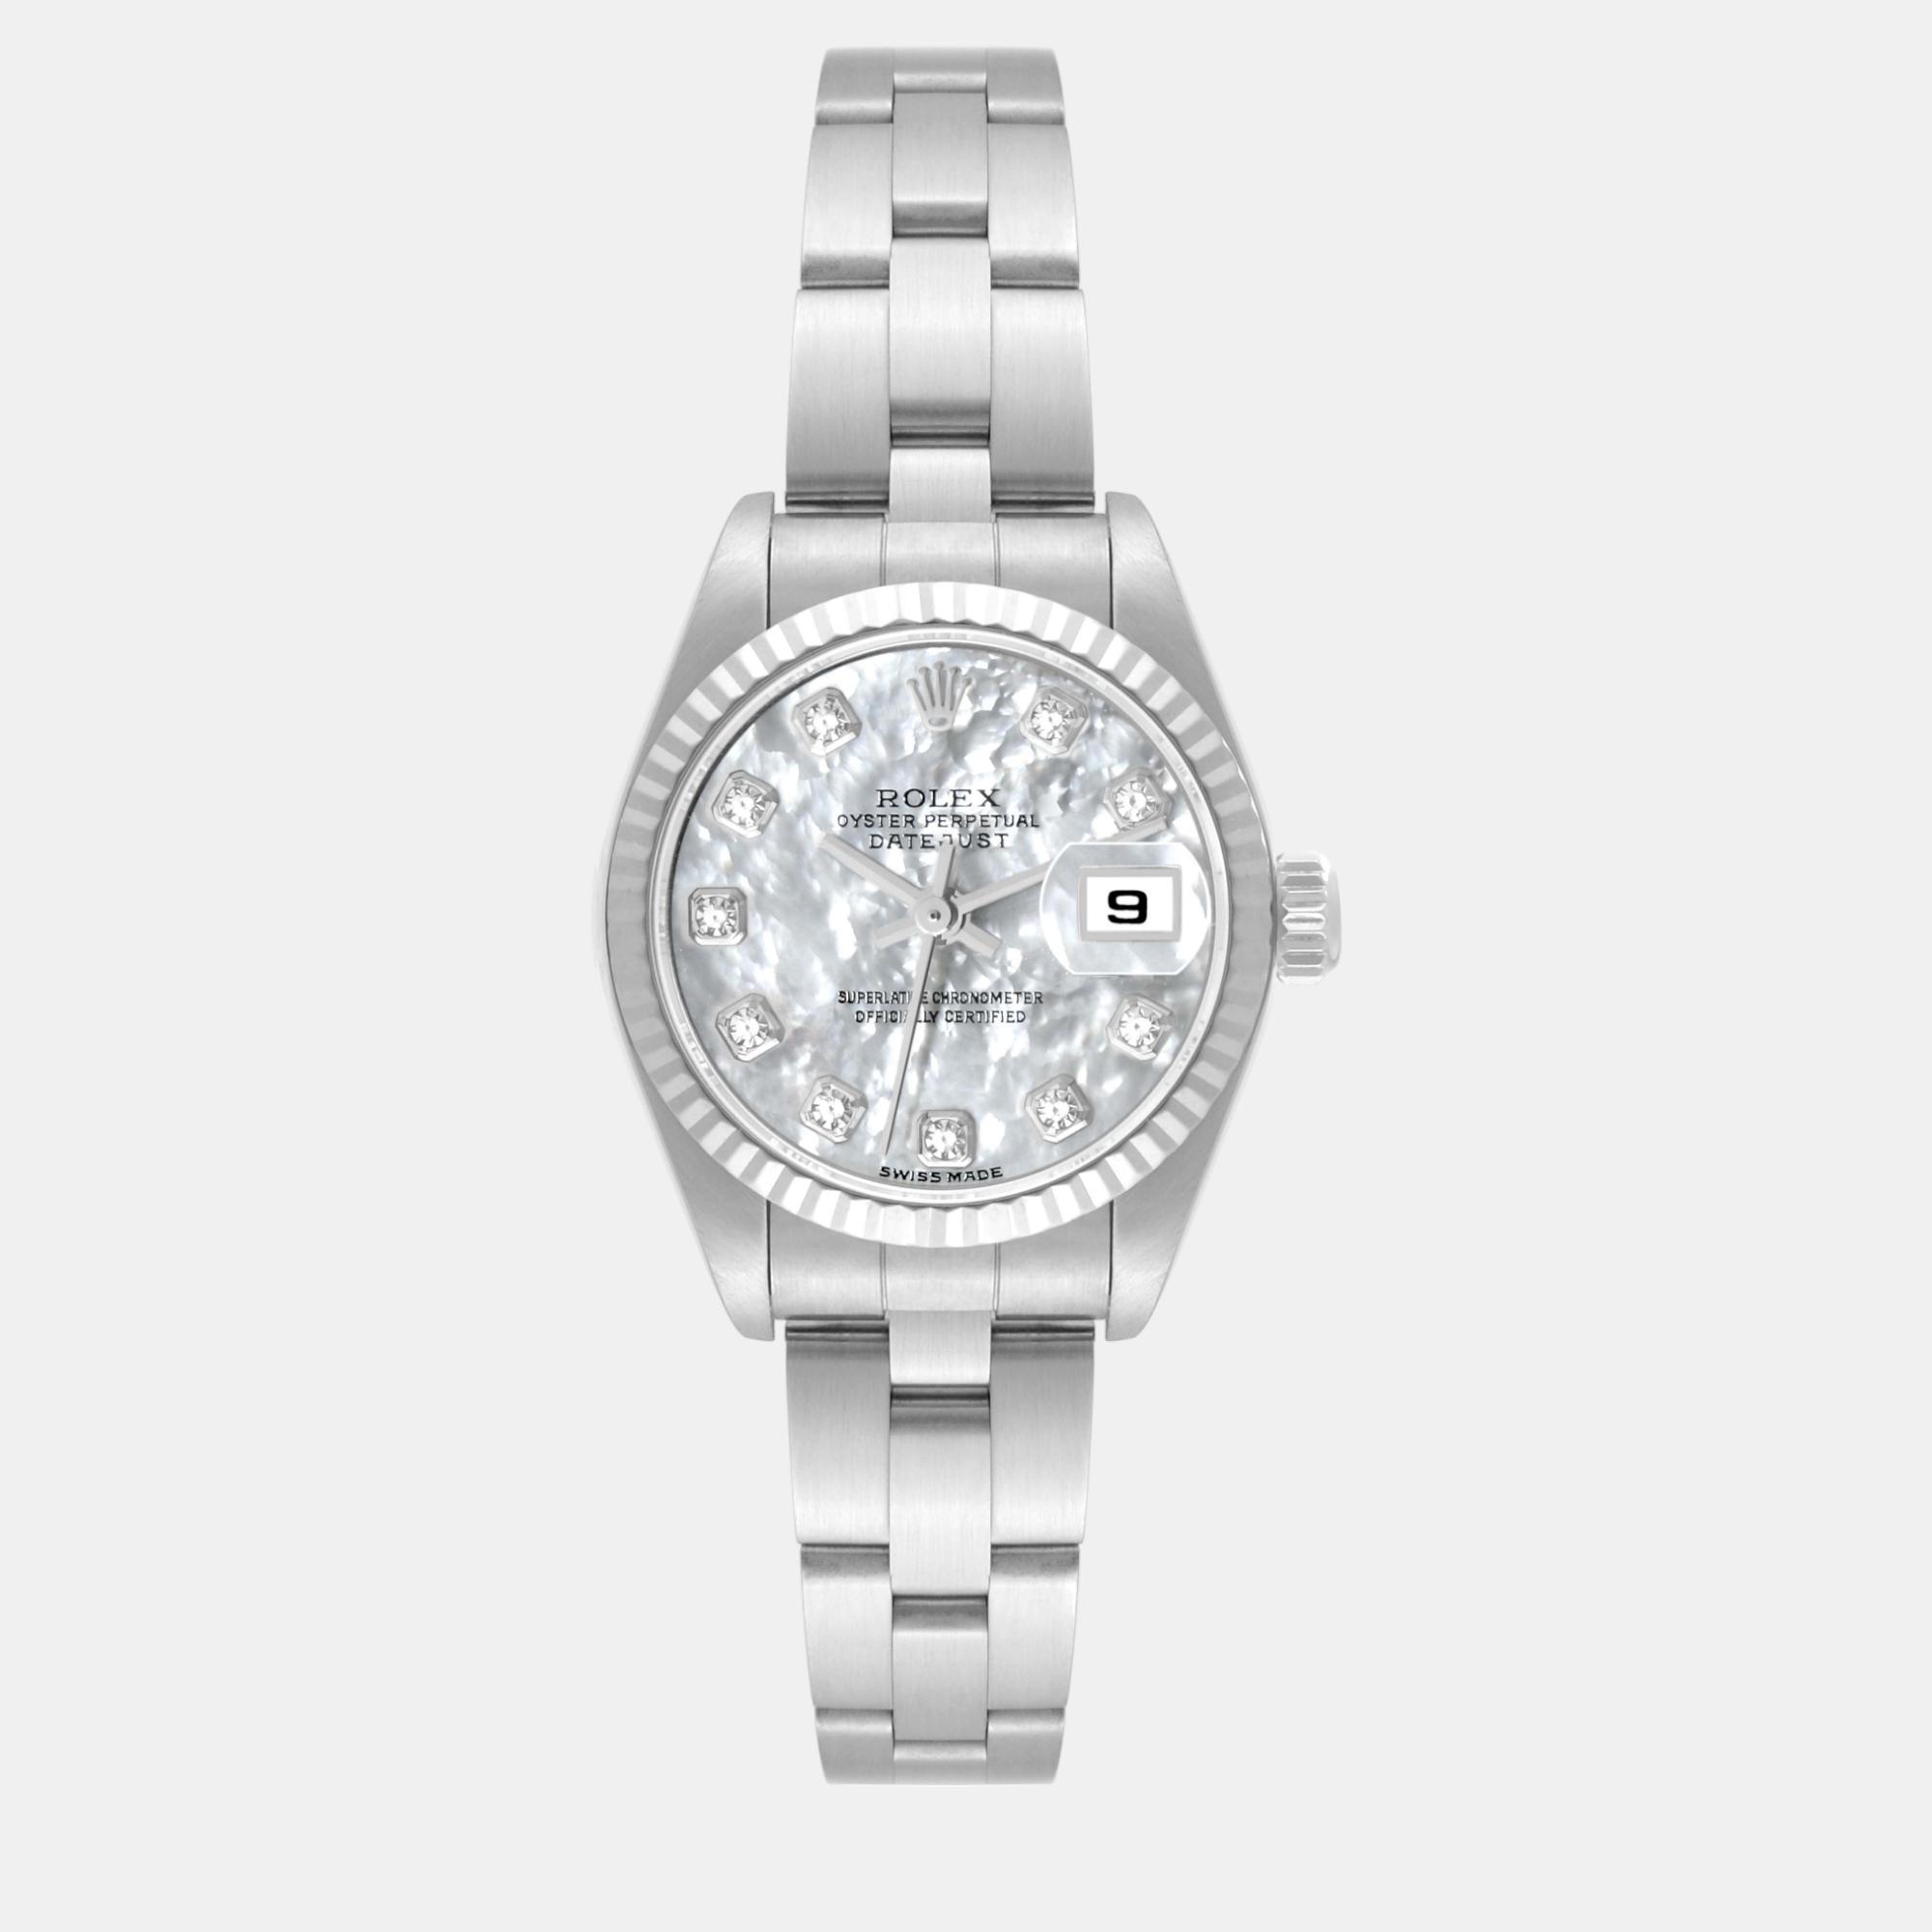 Rolex datejust steel white gold mother of pearl diamond ladies watch 26.0 mm